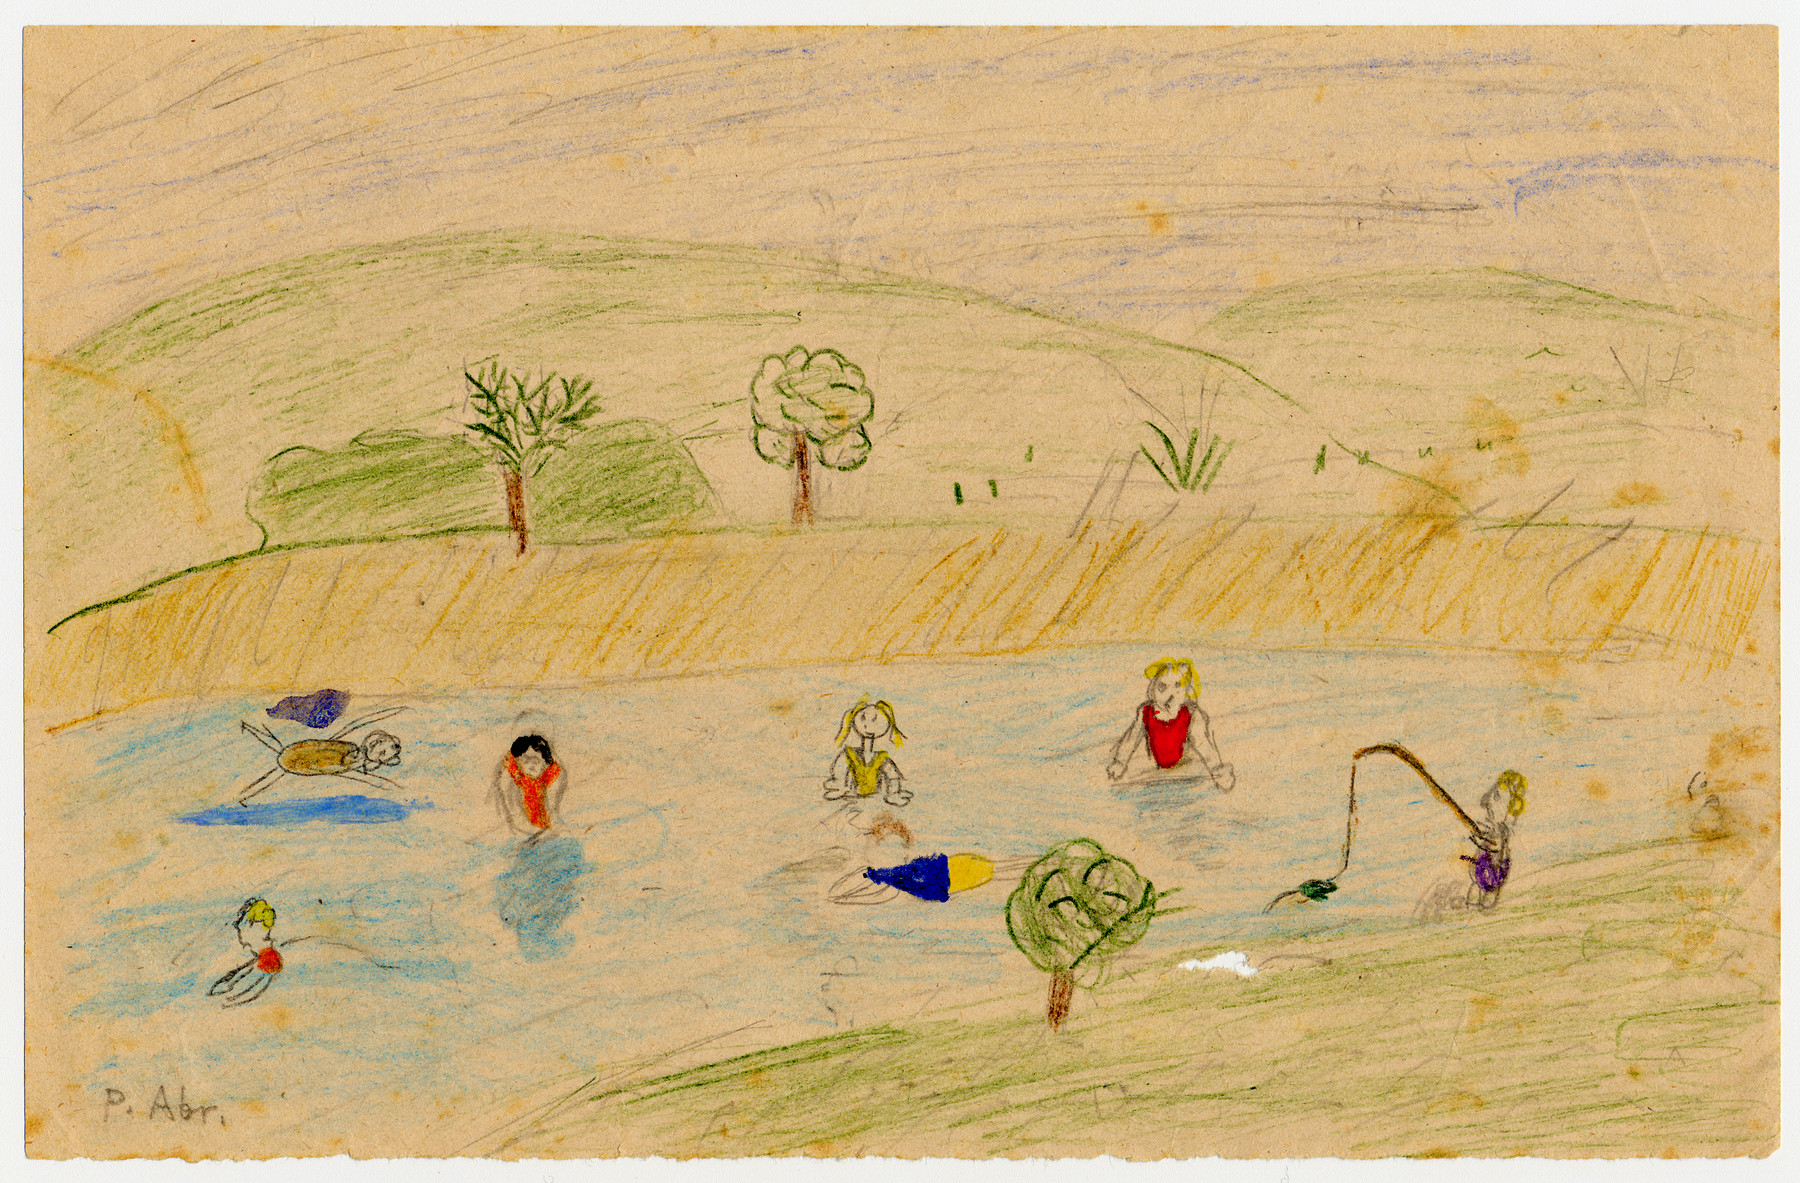 A child's drawing of children going swimming and fishing created by a child in Chateau de la Hille.